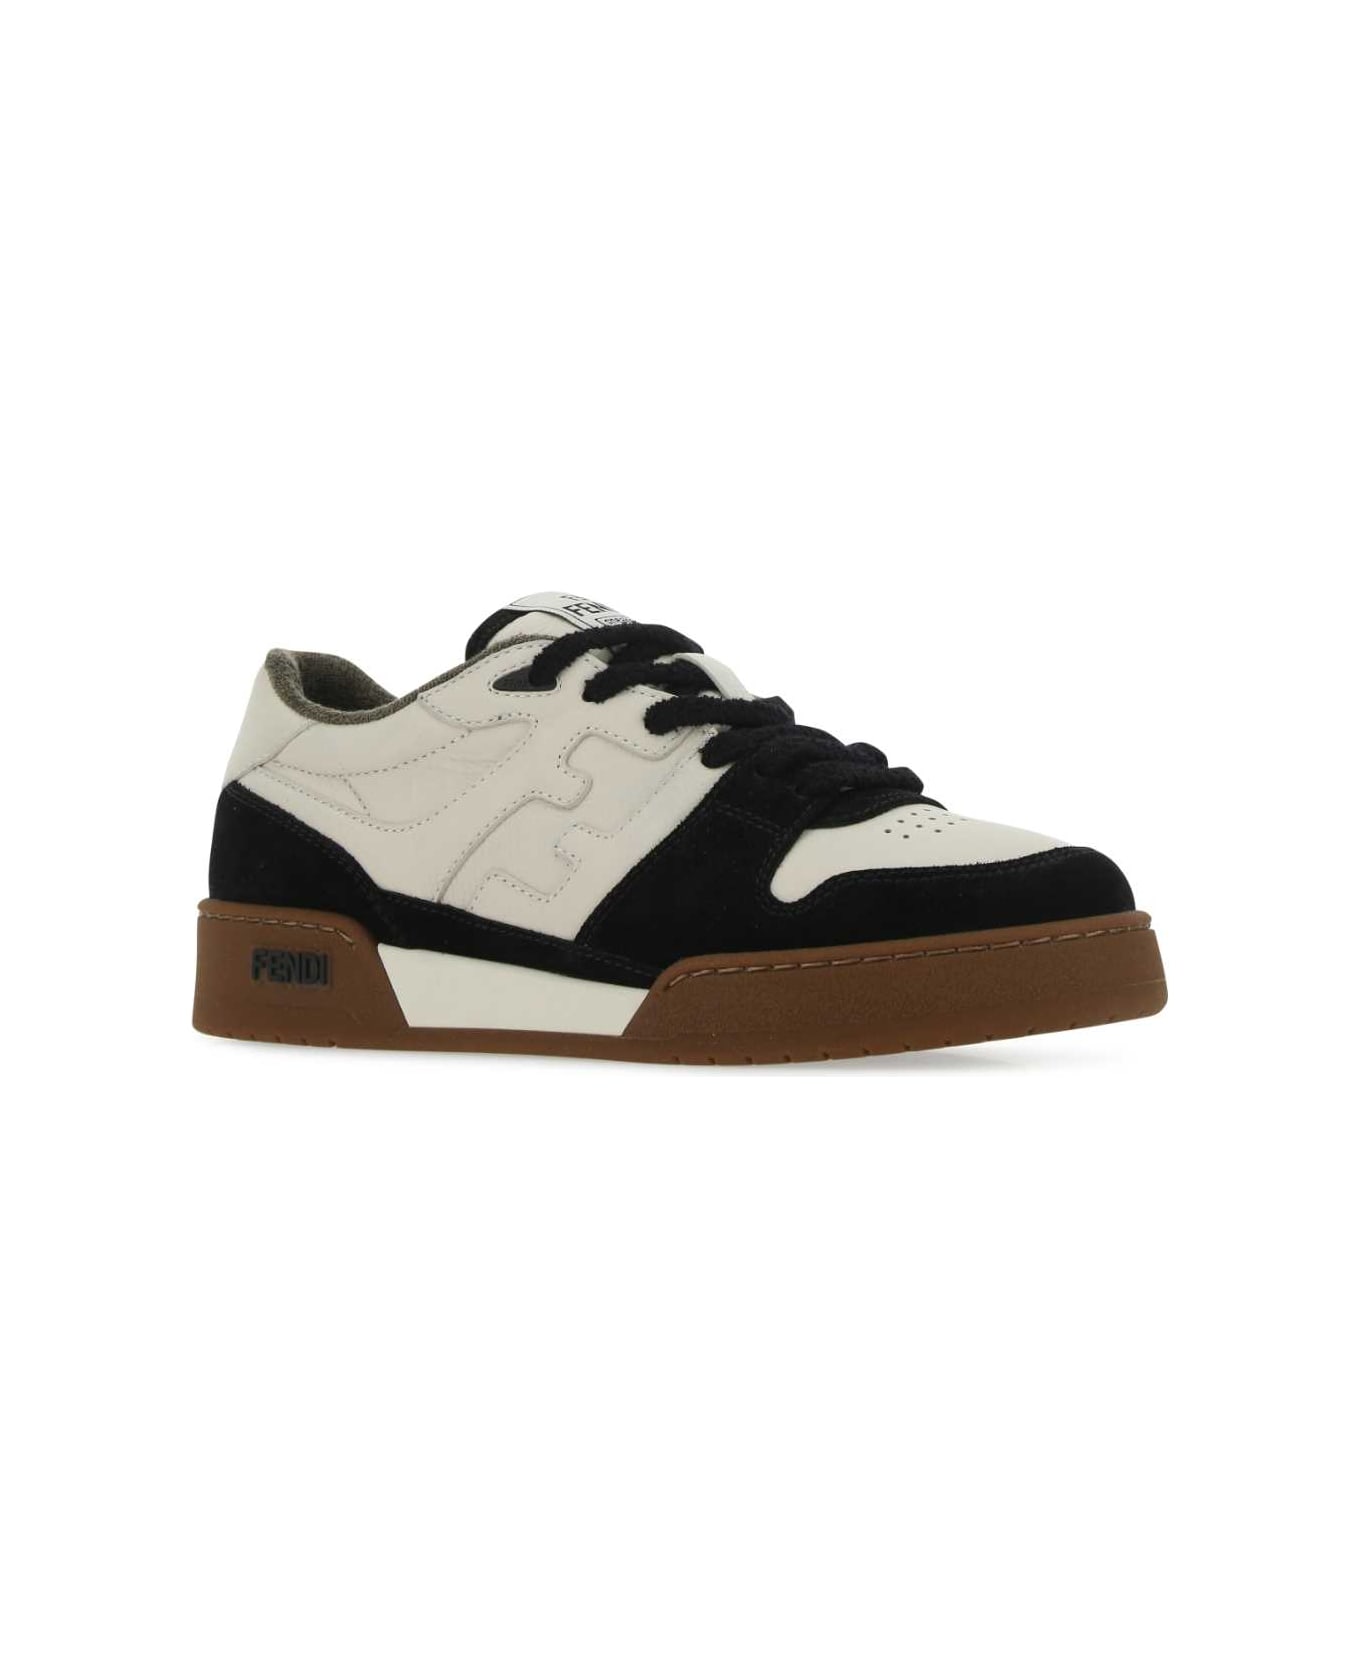 Fendi Multicolor Leather And Suede Fendi Match Sneakers - F1FZB